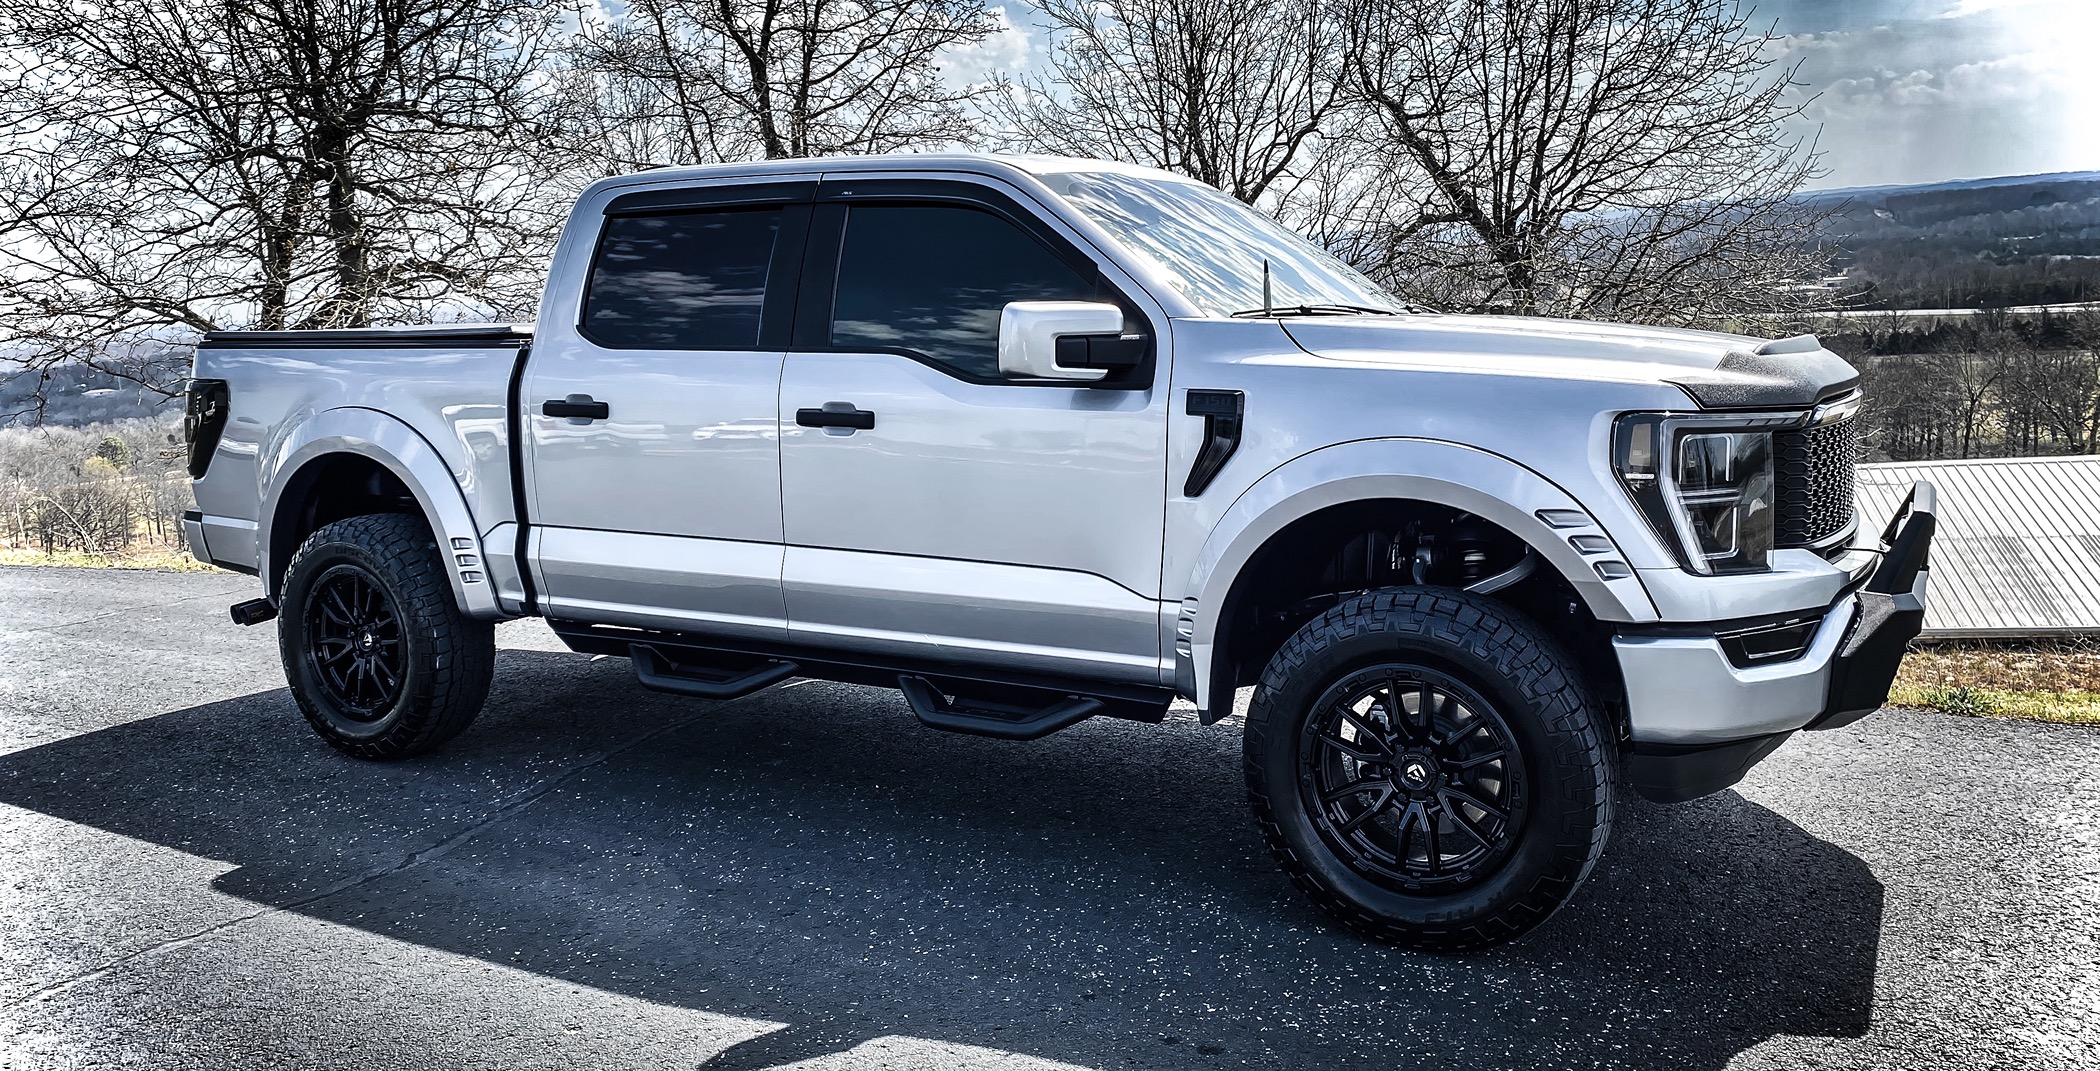 Ford F-150 Random F-150 Photos of the Day - Post Yours! 📸 🤳 IMG_5182_